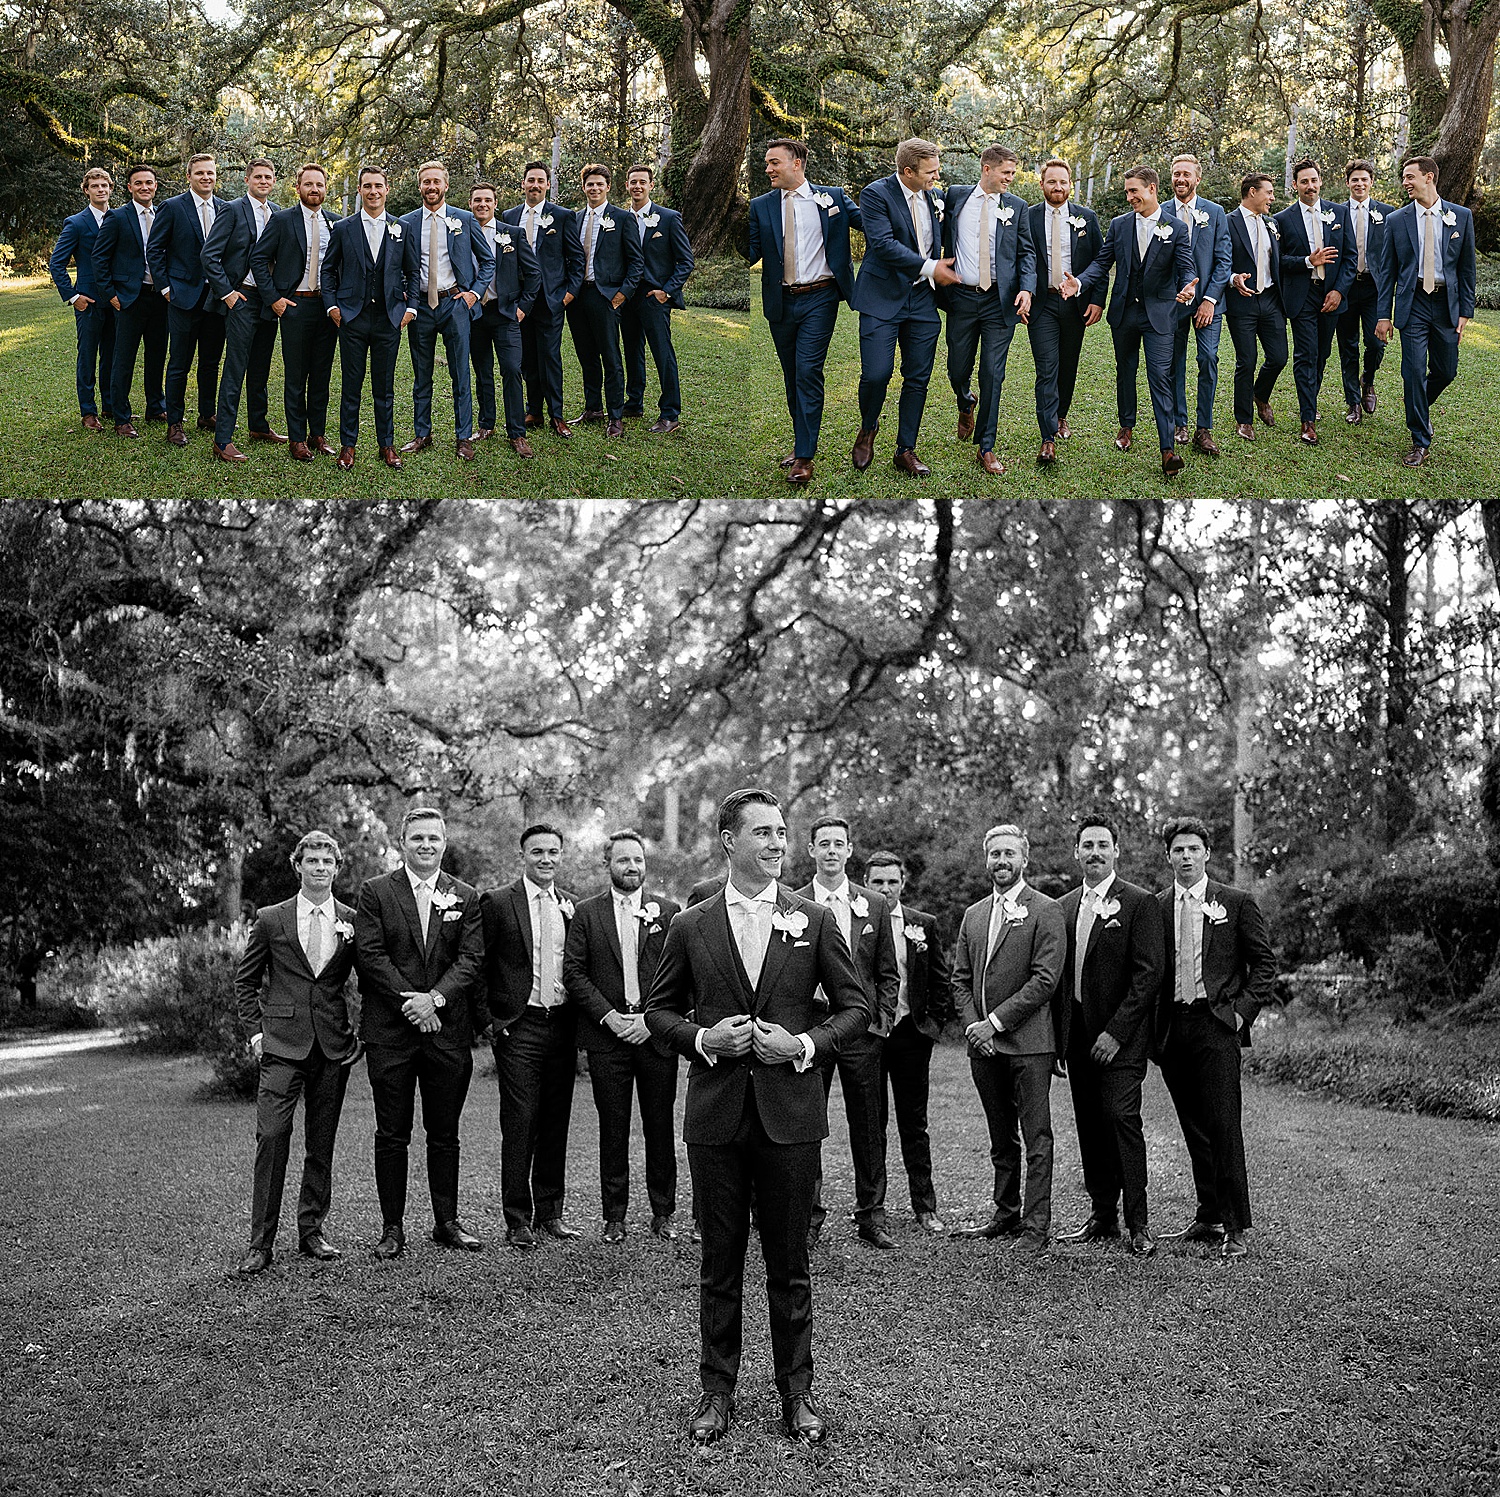 Groomsman wearing navy blue suits walking with groom and destination wedding photographer 